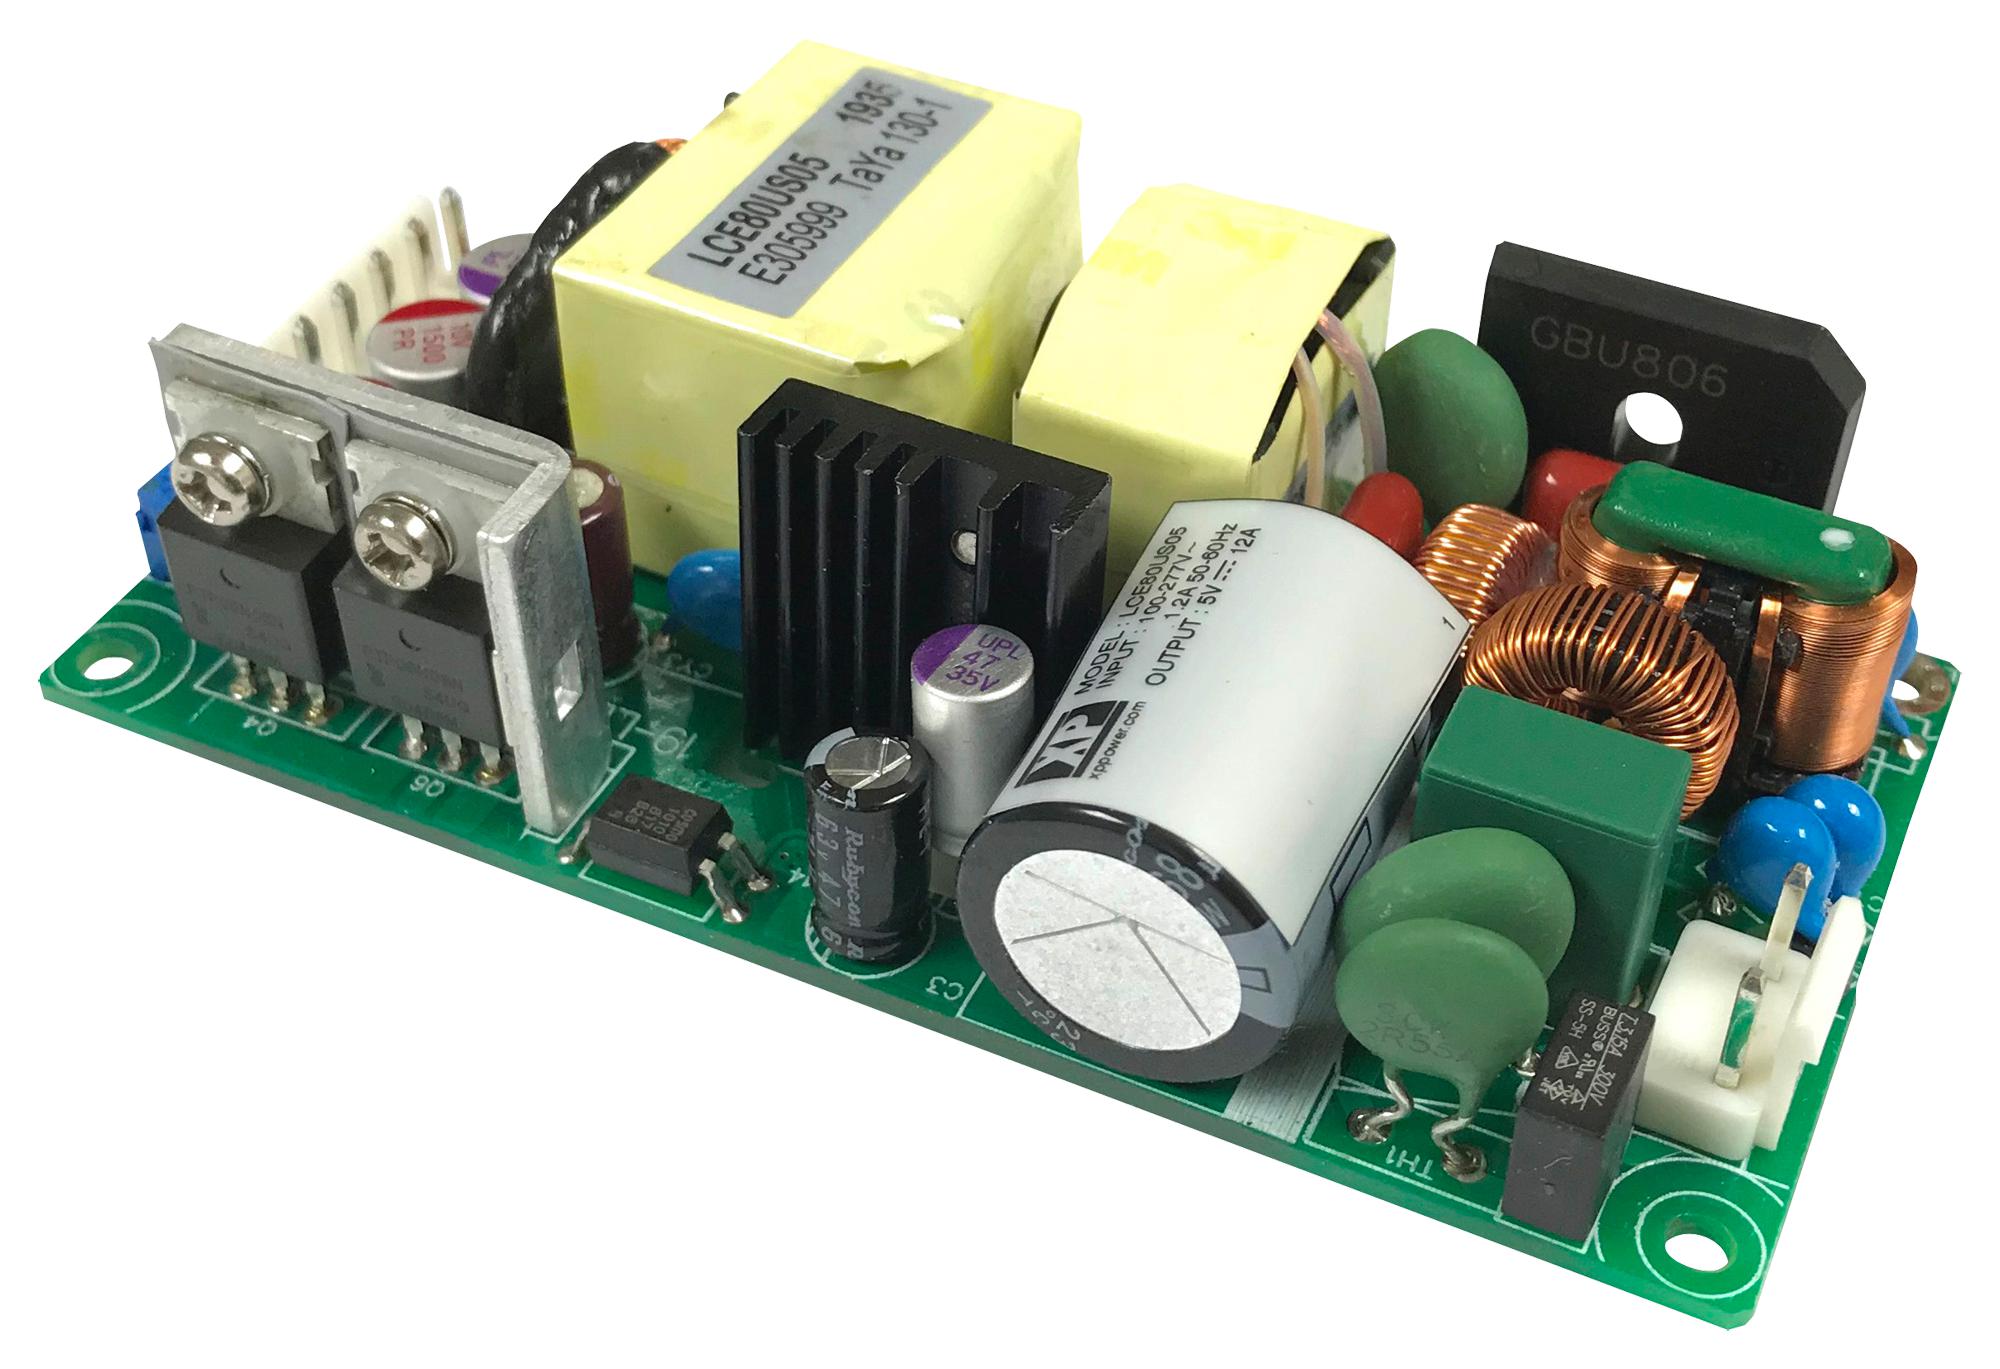 LCE80PS24 POWER SUPPLY, AC-DC, 24V, 3.33A XP POWER